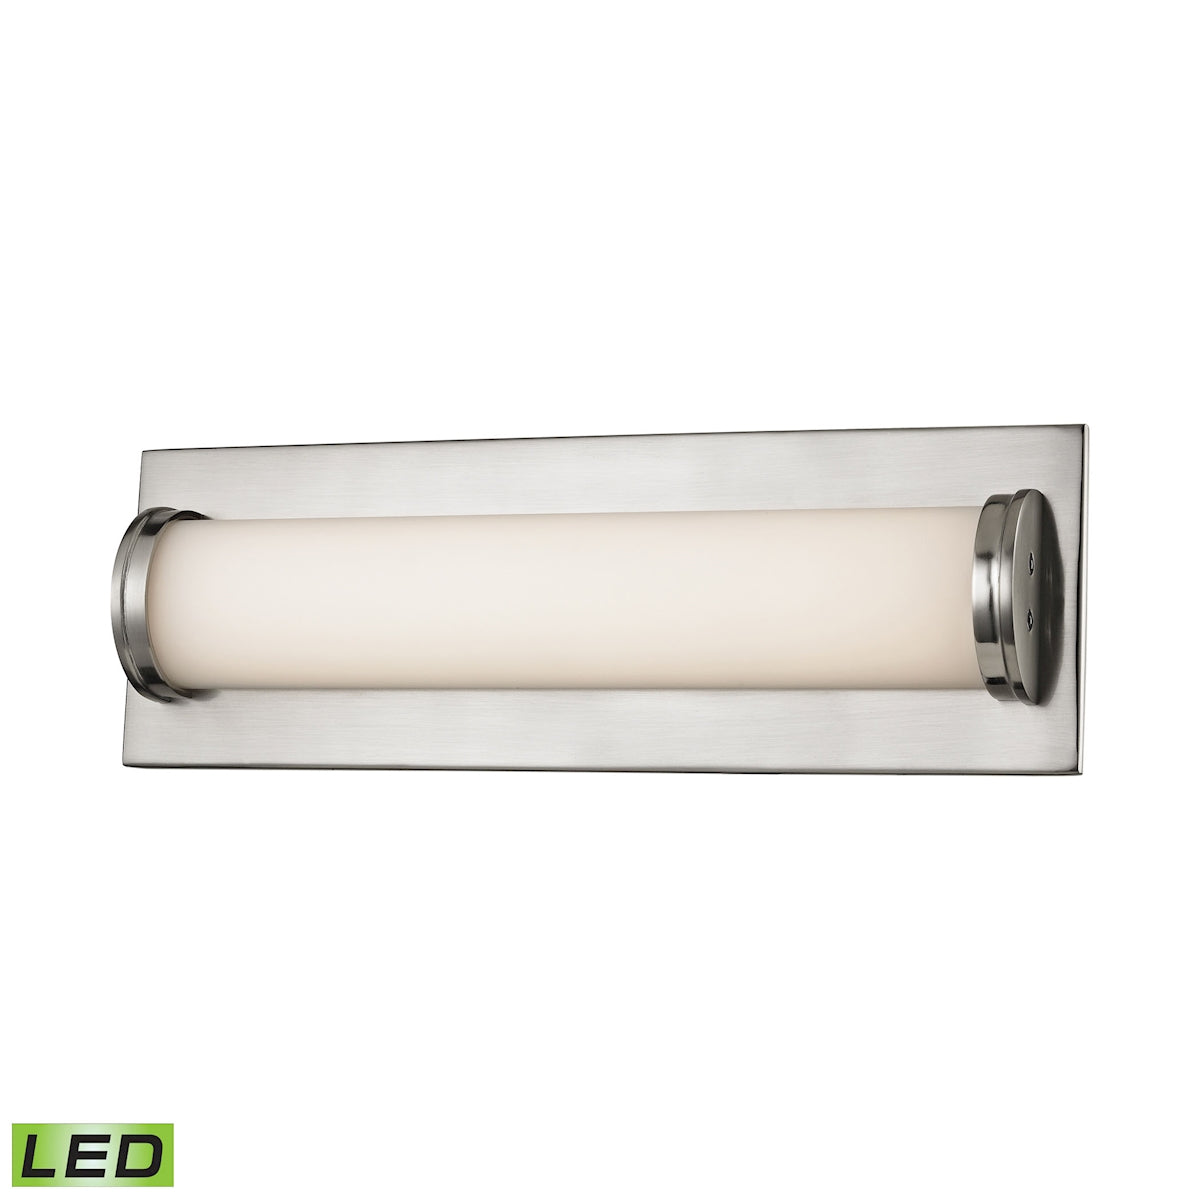 ELK Lighting BVL372-10-16M Barrie 1-Light Vanity Sconce in Matte Satin Nickel with Opal White Glass Diffuser - Integrated LED